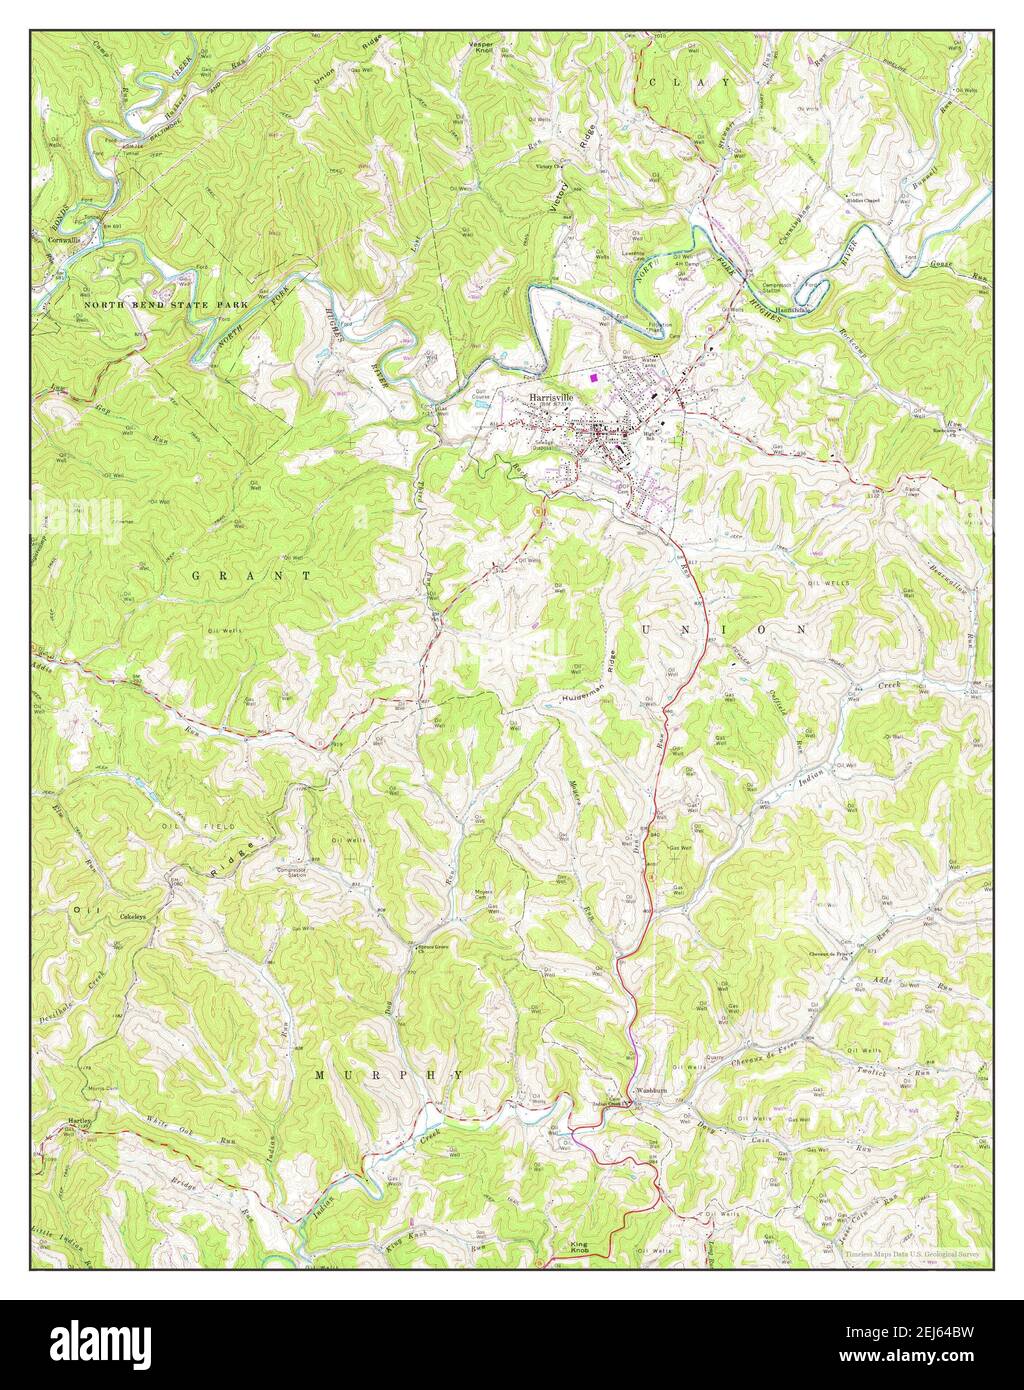 Harrisville, West Virginia, map 1964, 1:24000, United States of America by Timeless Maps, data U.S. Geological Survey Stock Photo